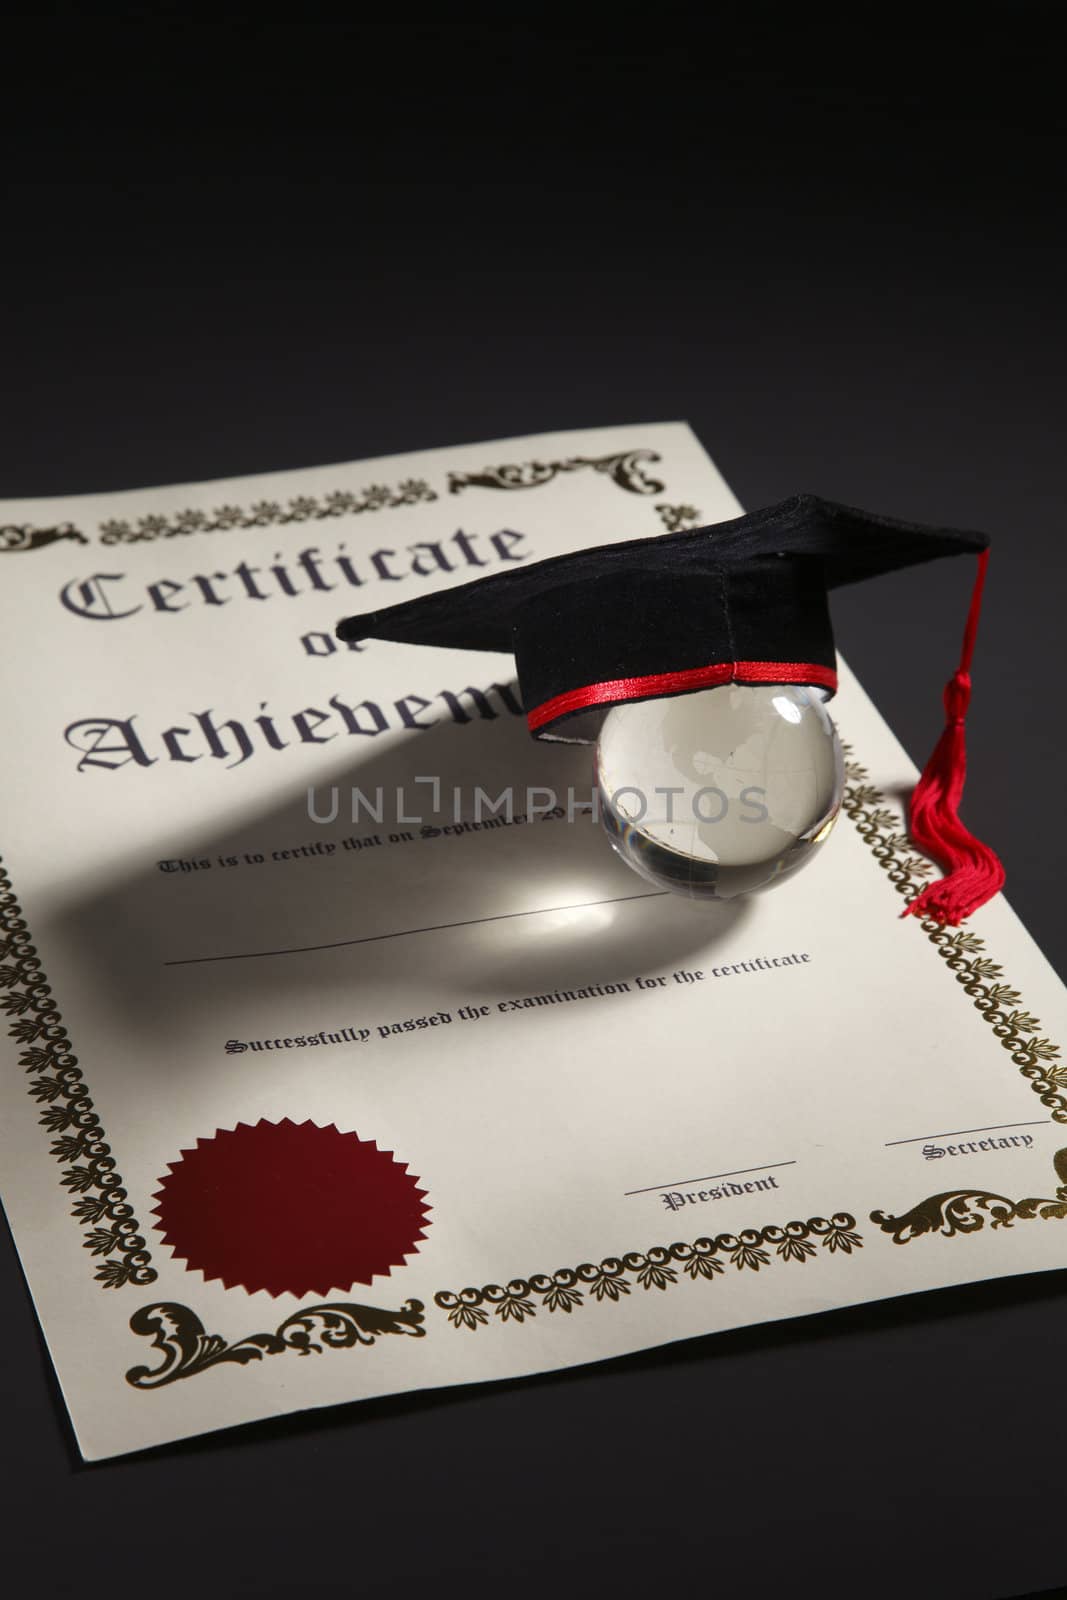 concept  image of the education,certificate,moartar board and globe